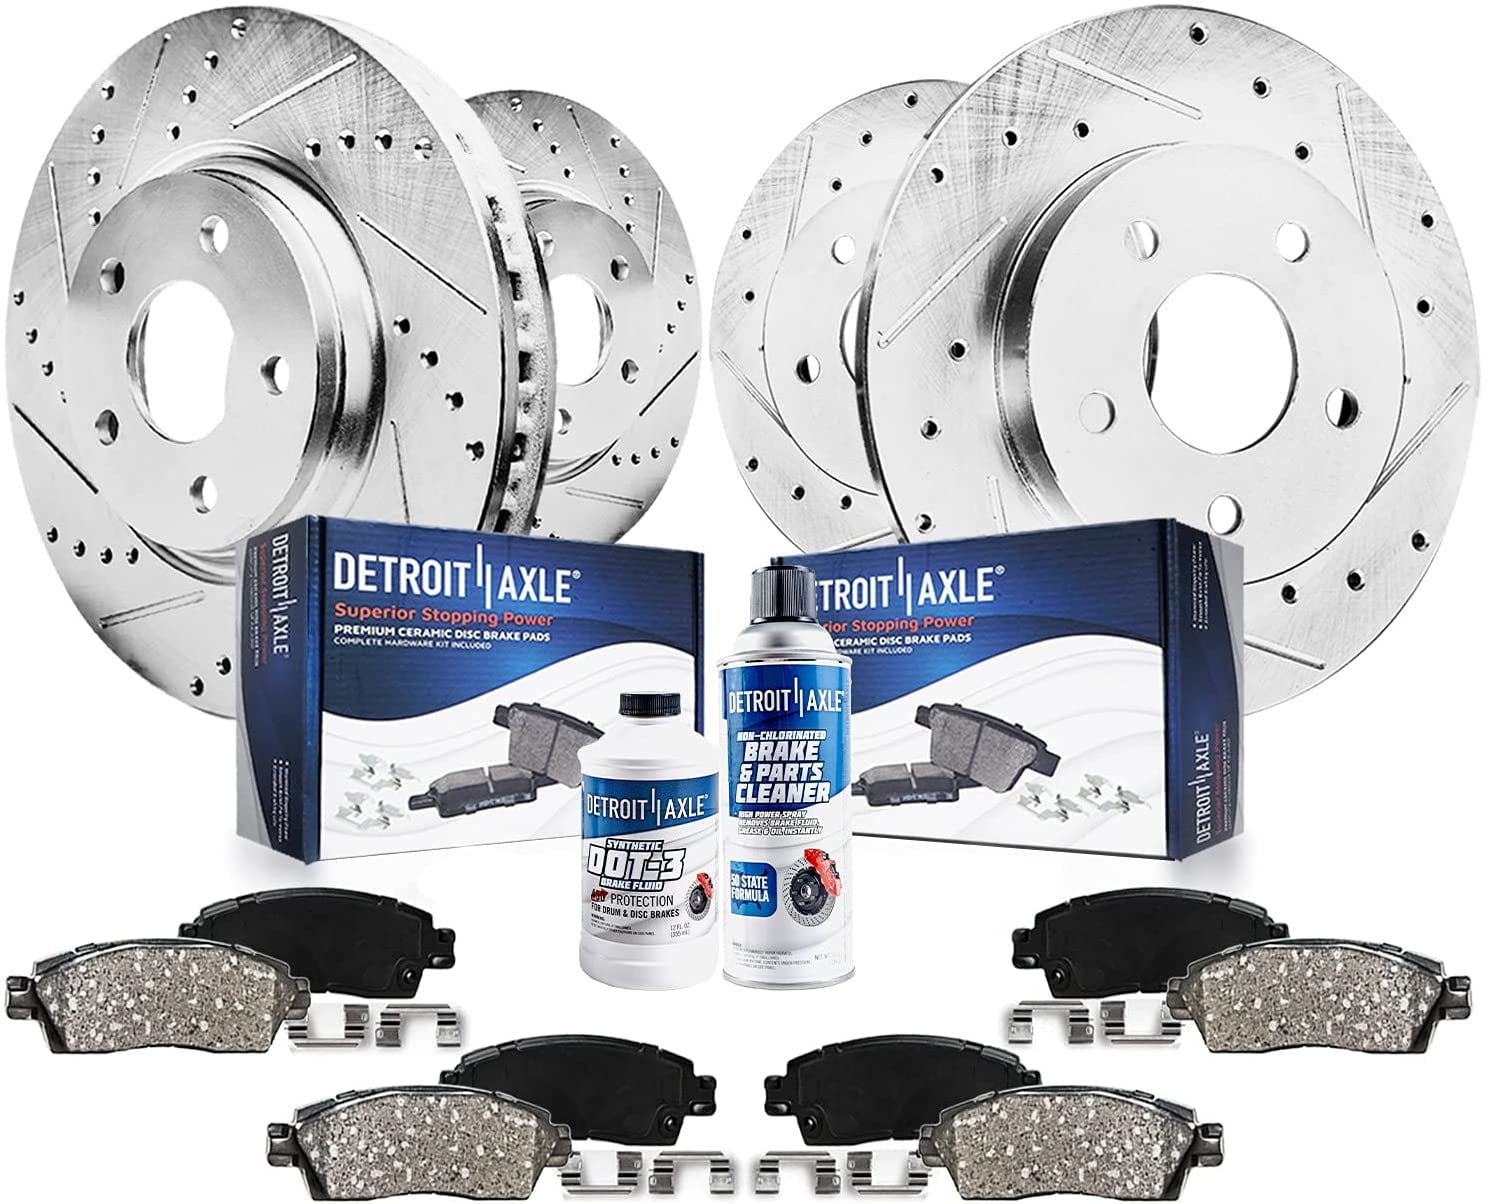 Performance Grade for Lexus Toyota ES300h ES350 AVALON Camry 11.02 280mm Detroit Axle 5 Lug REAR Drilled and Slotted Brake Rotors 